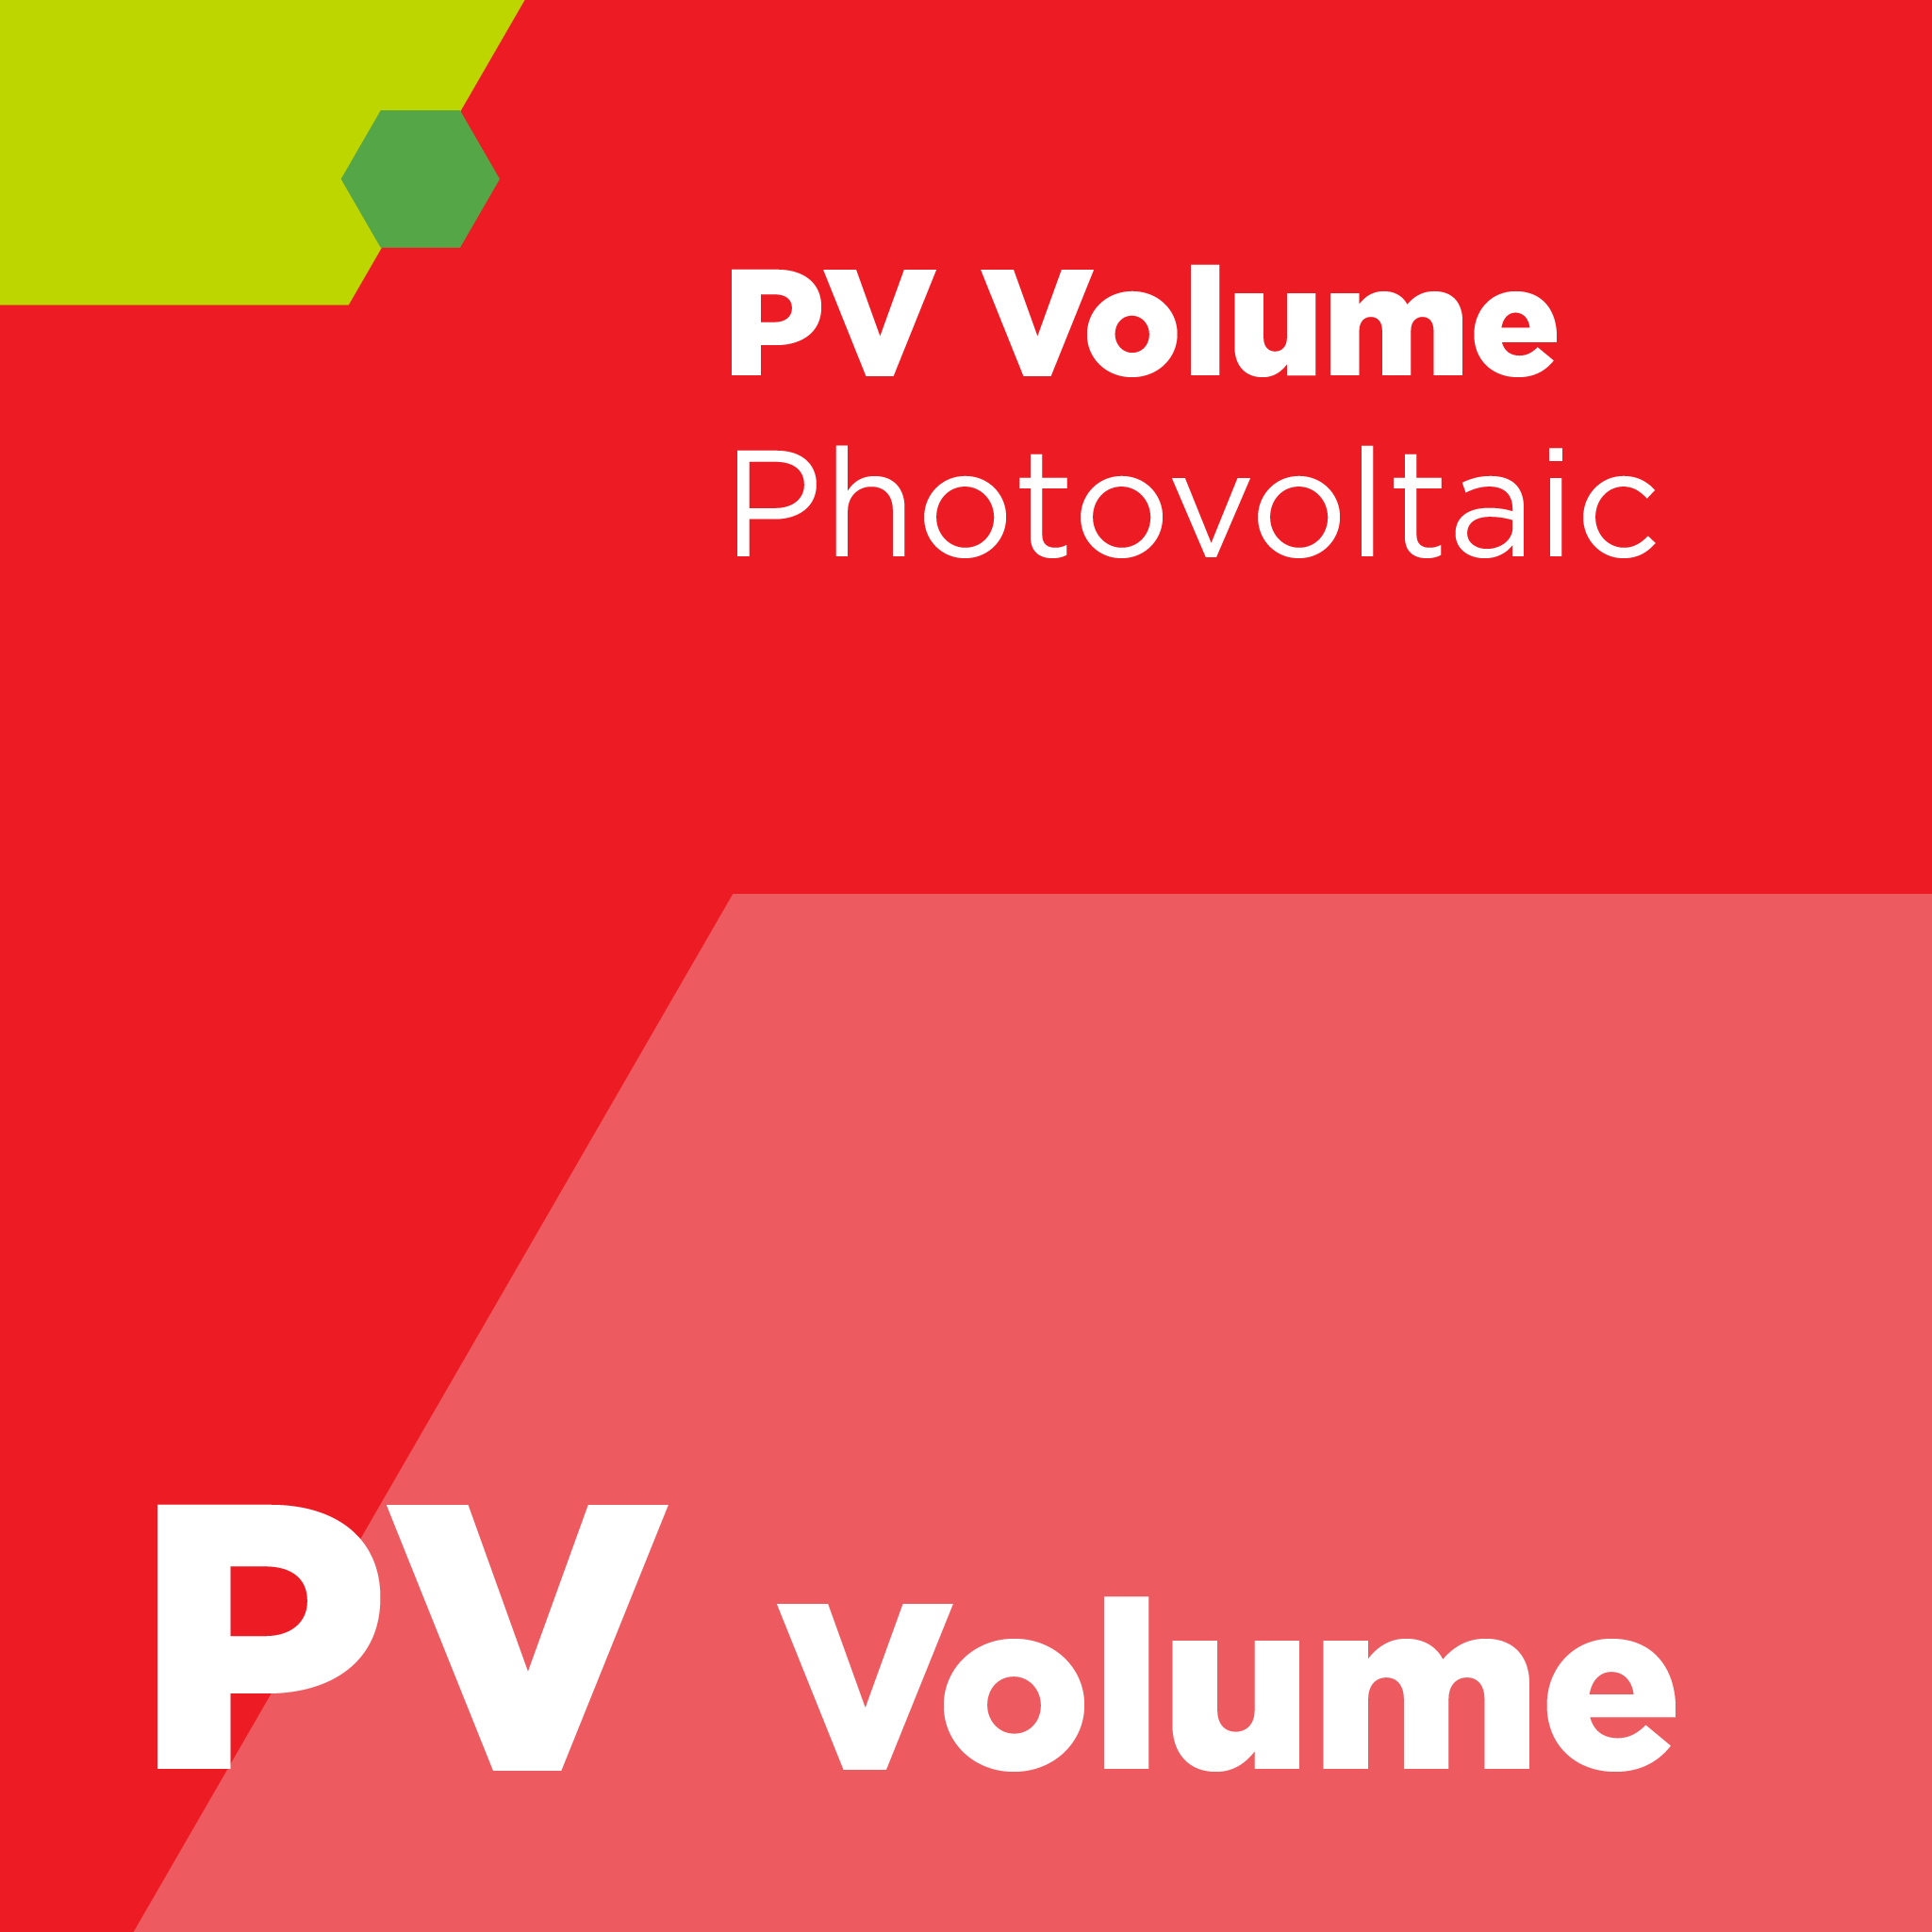 PV03500 - SEMI PV35 - Specification for Horizontal Communication Between Equipment for Photovoltaic Fabrication System